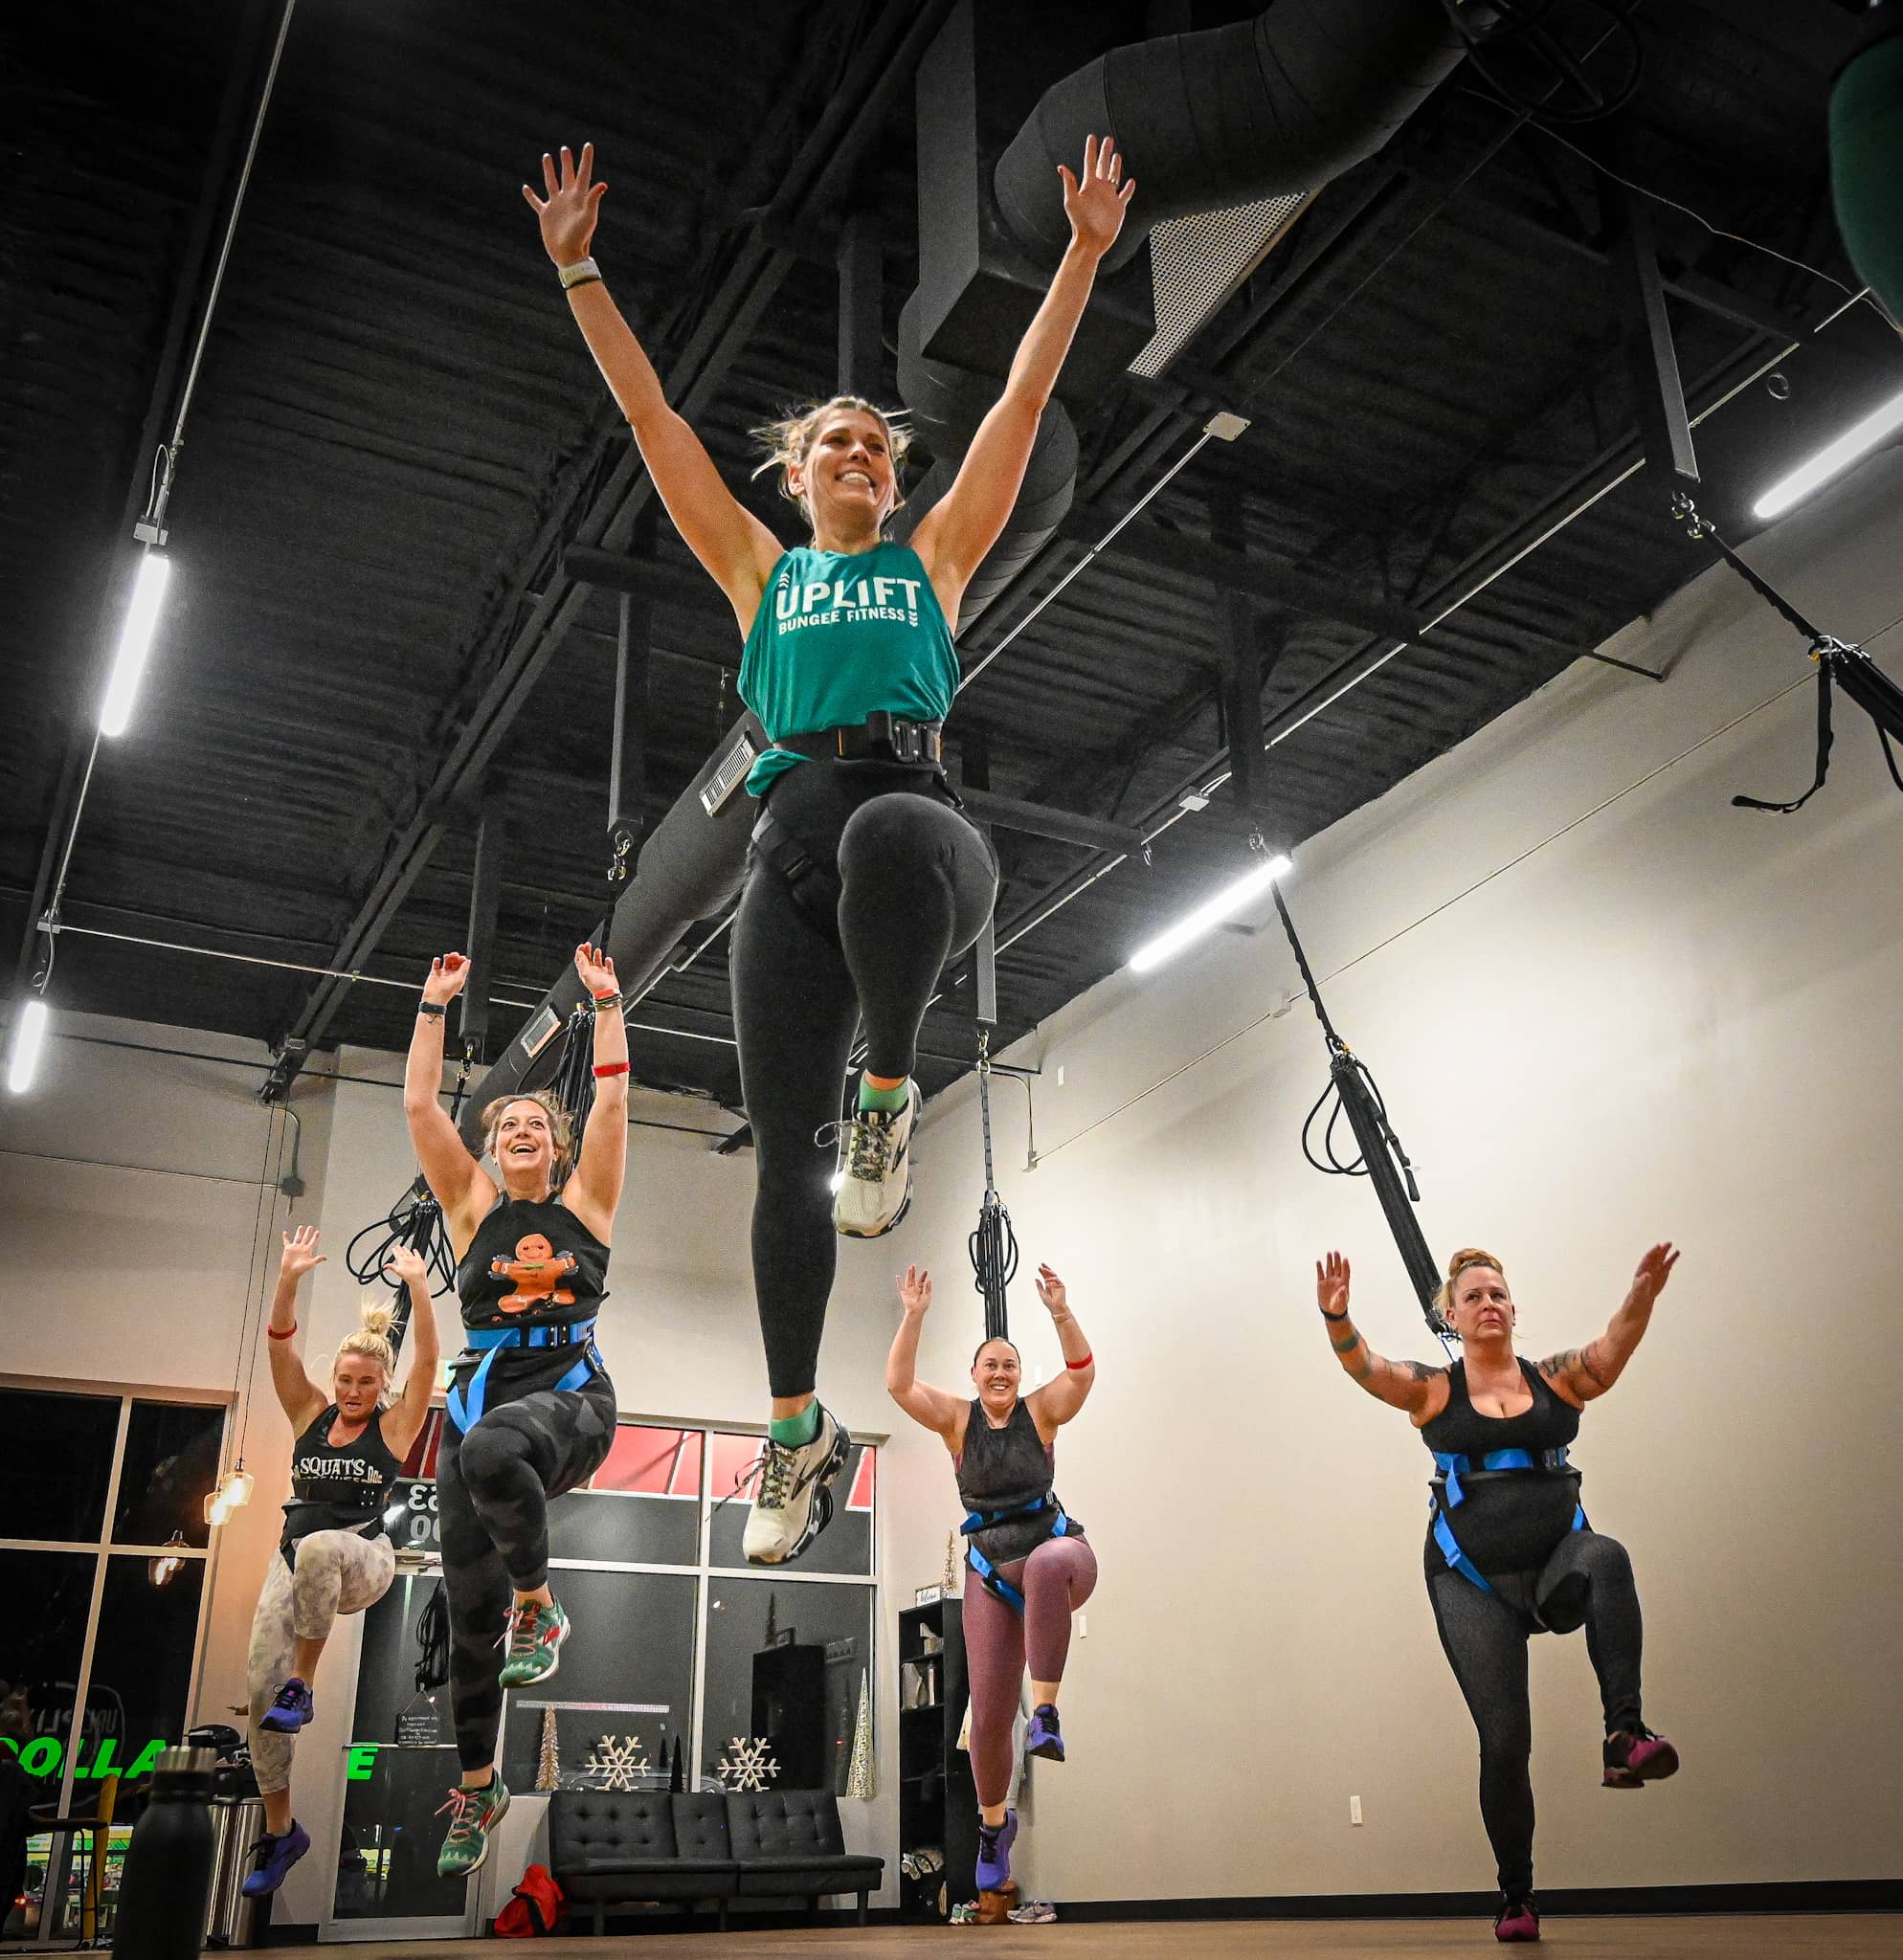 Calgary's First Bungee Workout Facility Is Open in the Northeast